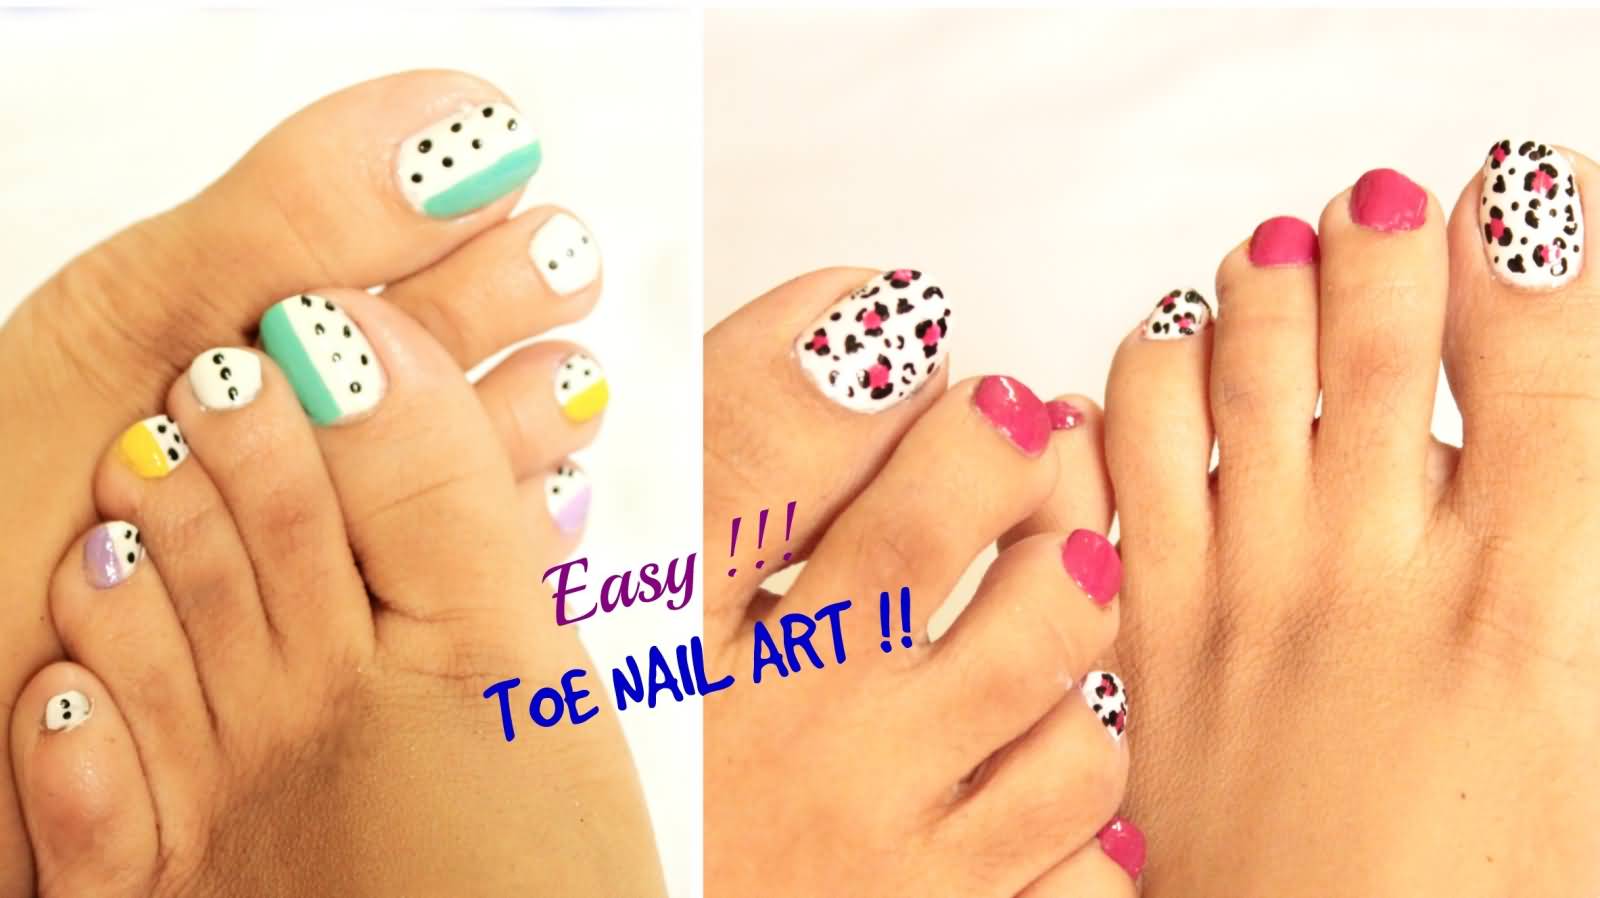 3. Quick and Easy Toe Nail Art Ideas - wide 8